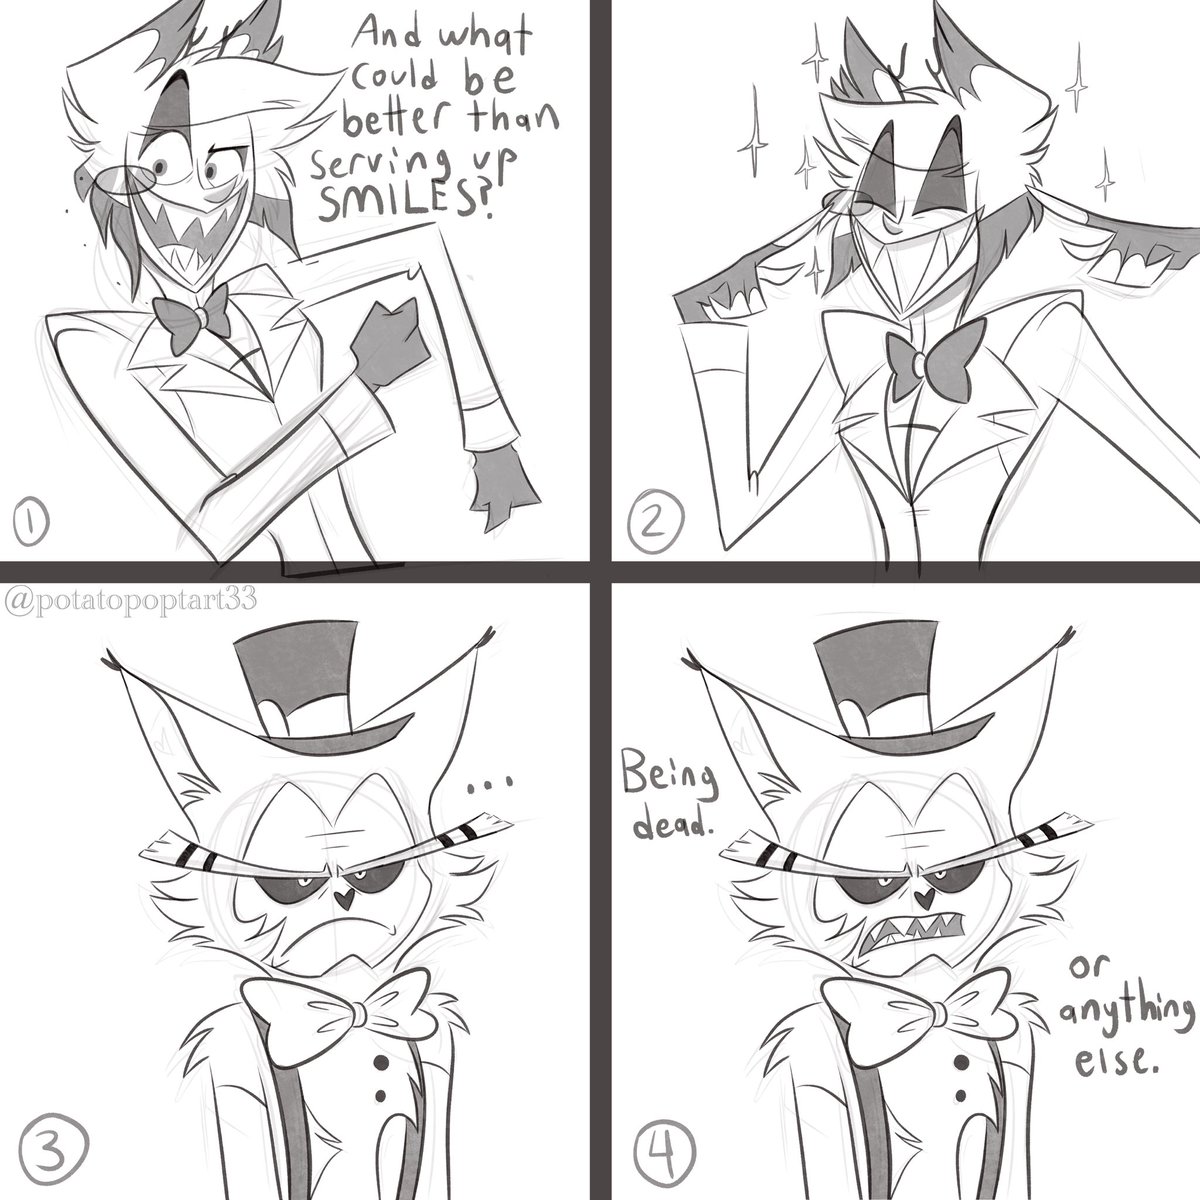 That one SpongeBob scene but these two 🎩 🦌 
#HazbinHotel #Hazbin #HazbinHotelFanart #HazbinFanart #HazbinHotelAlastor #HazbinHotelHusk #HazbinAlastor #Alastor #AlastorFanart #HazbinHusk